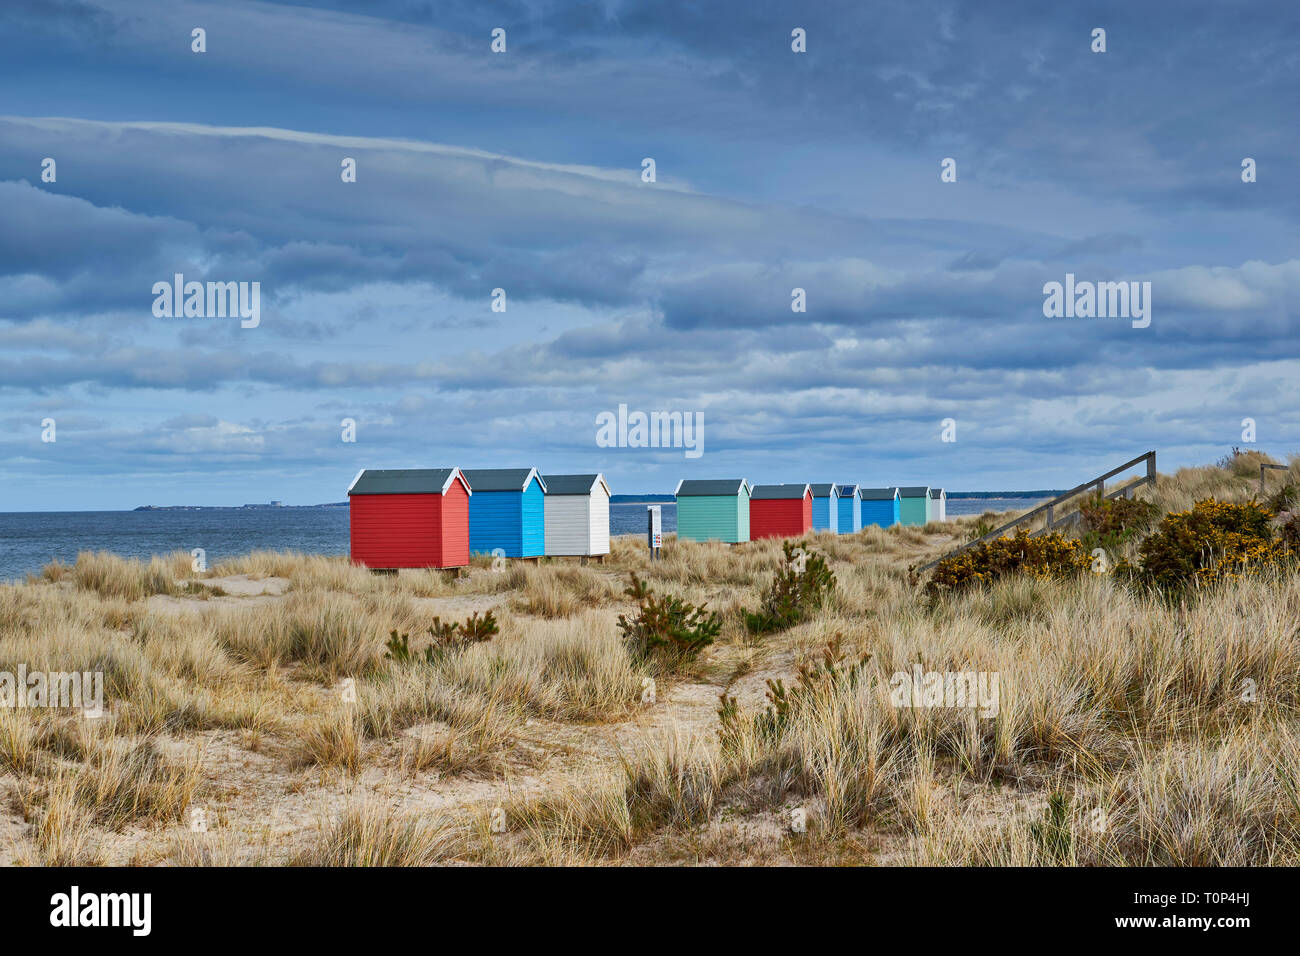 FINDHORN BEACH MORAY FIRTH SCOTLAND PASTEL COLOURED CHALETS OR BEACH HUTS ON  BEACH WITH SEA GRASS Stock Photo